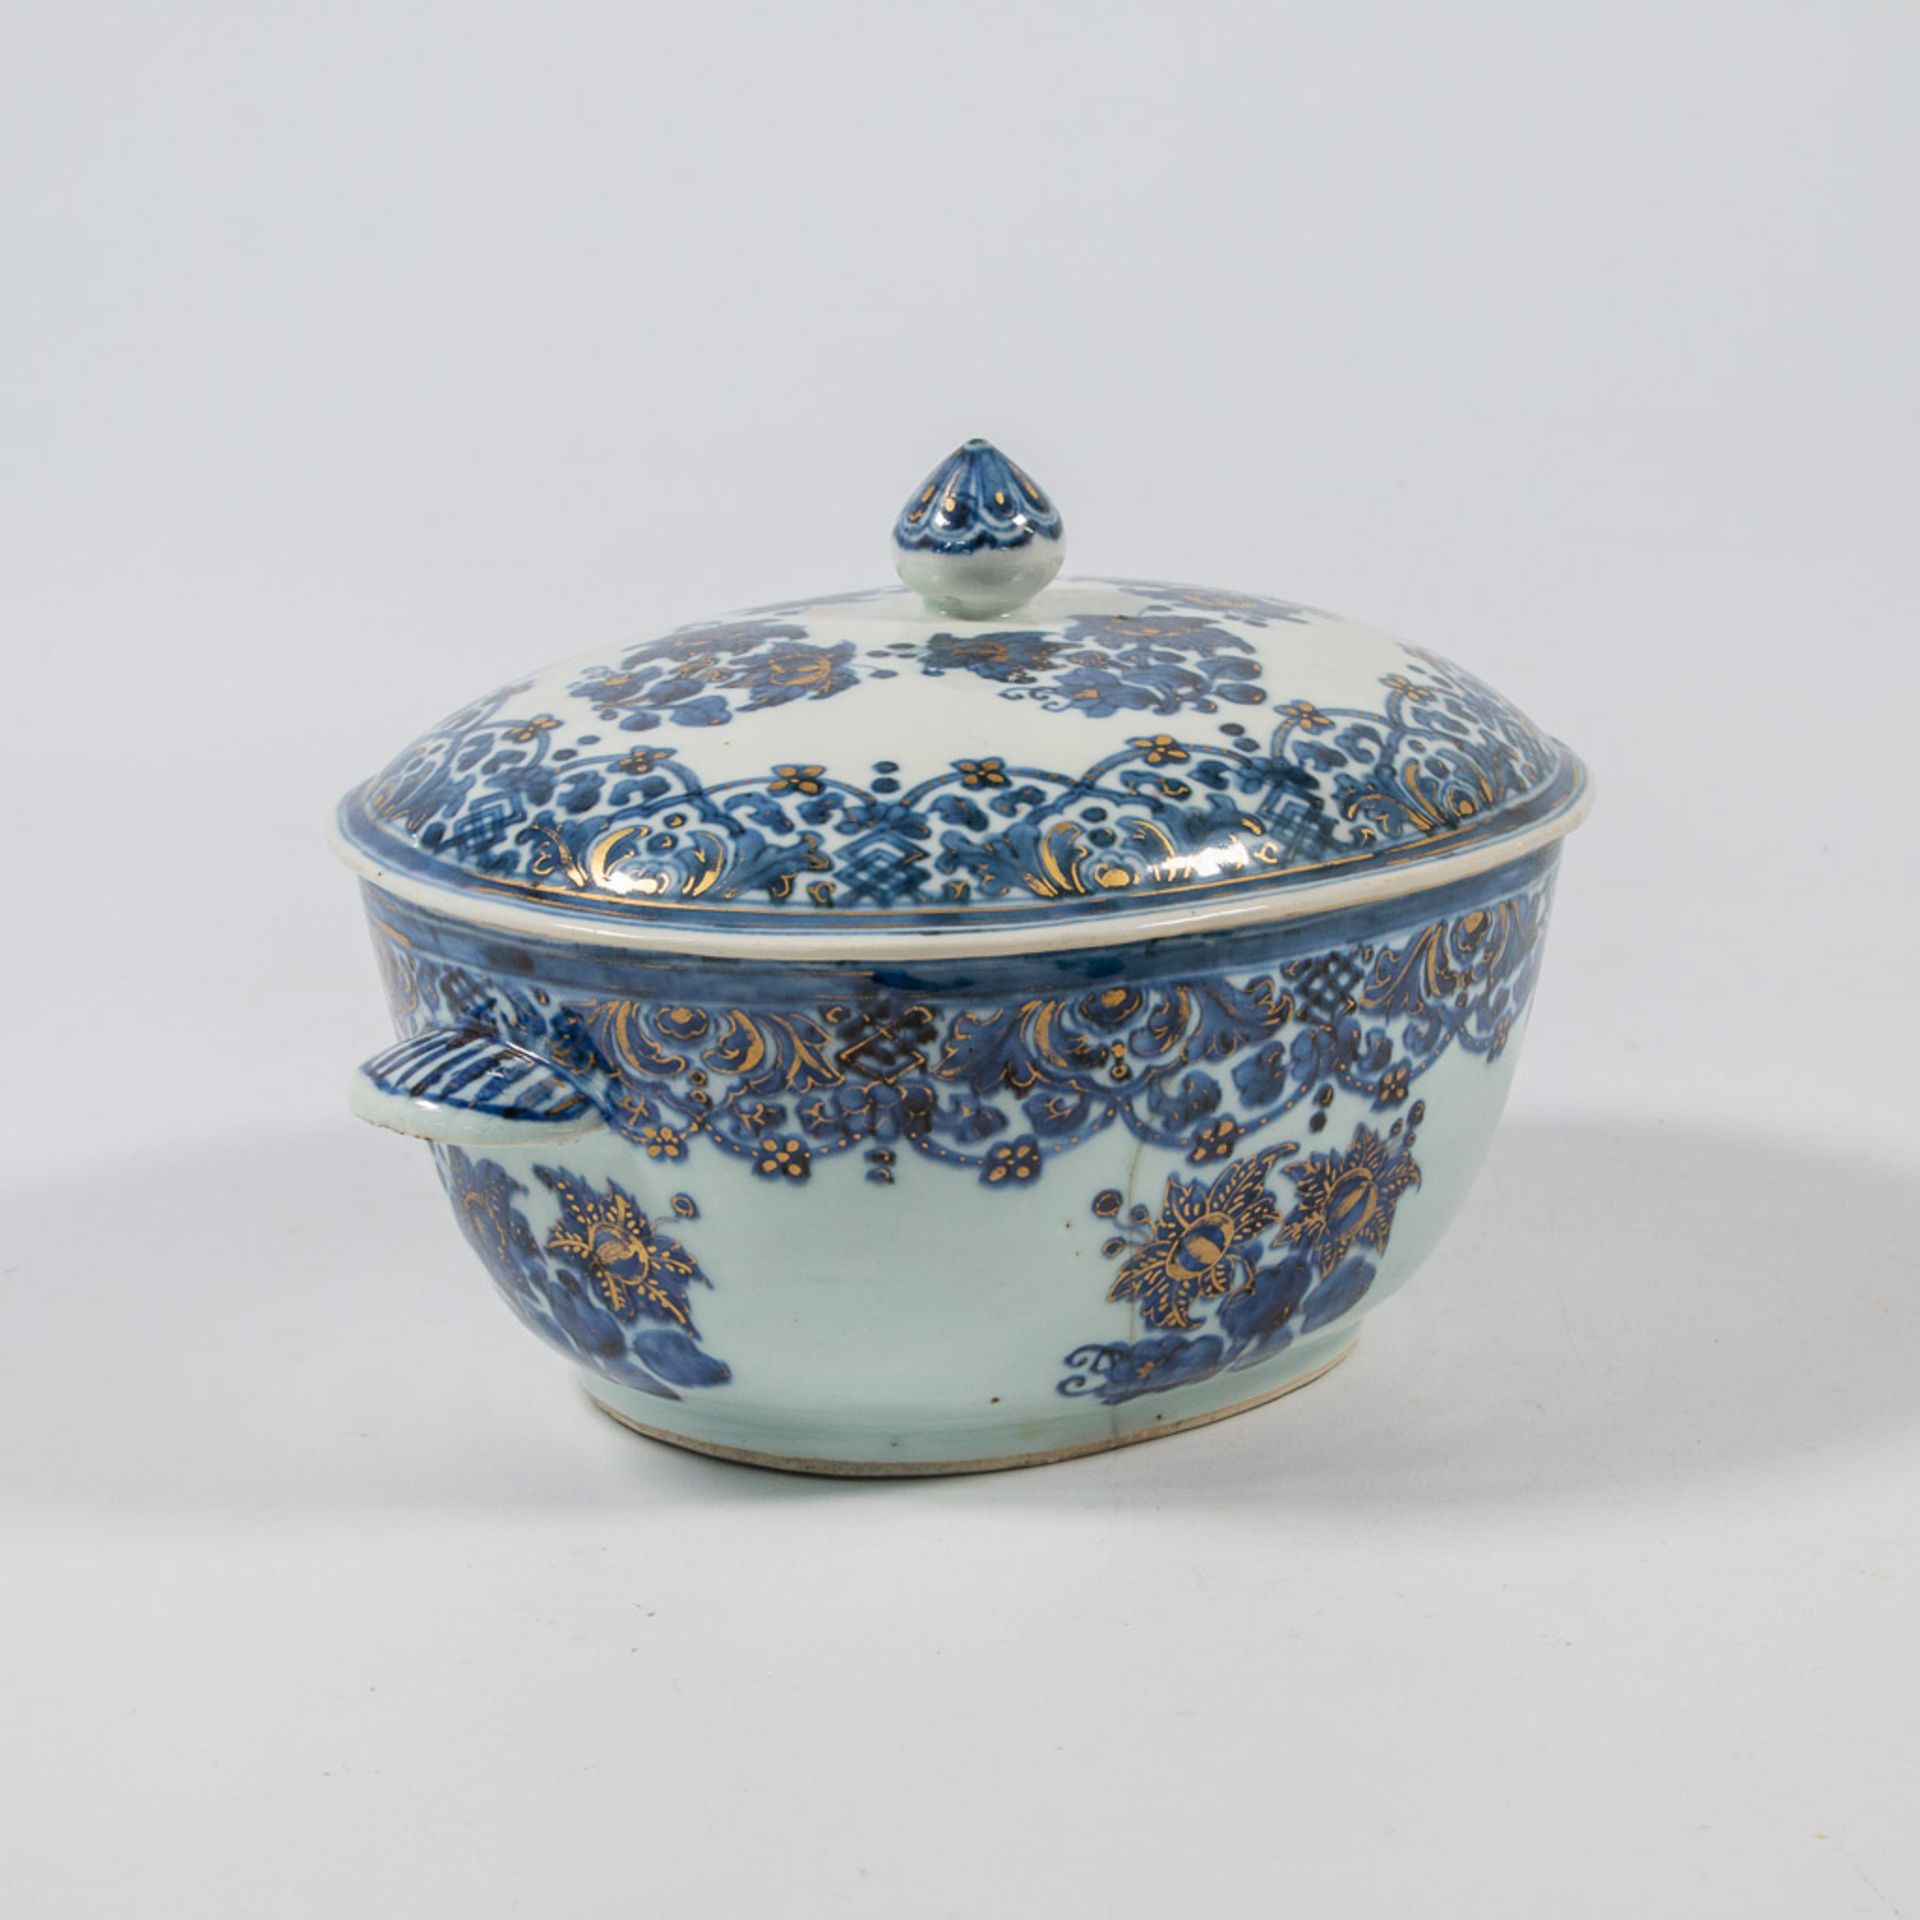 A small tureen with lid, Chinese export porcelain with underglaze blue, white and overglaze gold flo - Image 11 of 24